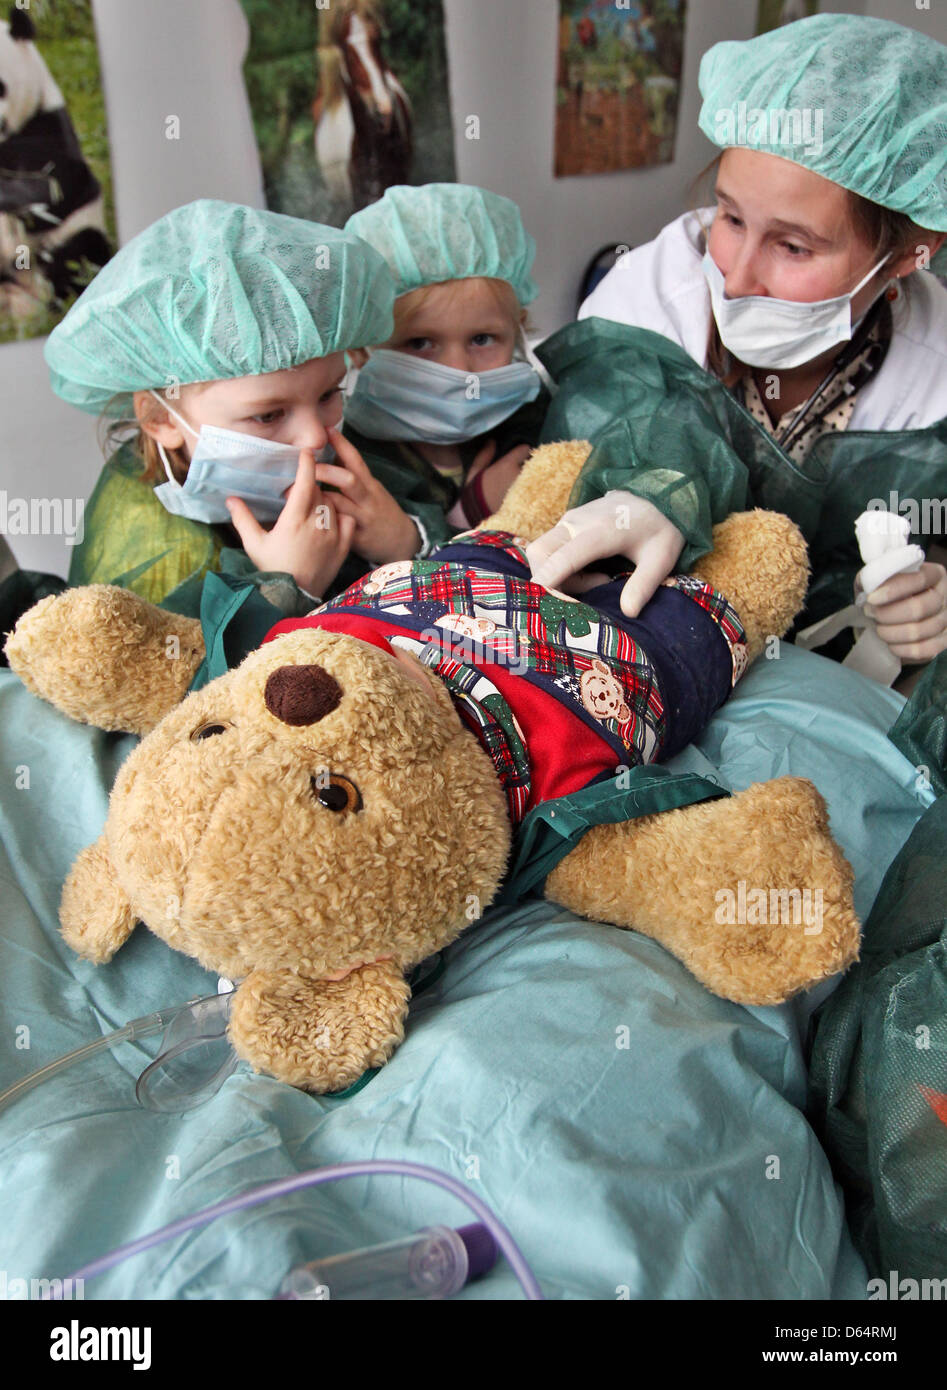 Medical student Franziska Schmeil (R) operates on the teddy bear 'Mr bear' at the 'Teddy bear clinic' in Halle (Saale), Germany, 04 June 2012. During the surgery the appendix of the bear is removed. The Teddy bear clinic wishes to remove the fear of hospitalisation. Photo: Jan Woitas Stock Photo